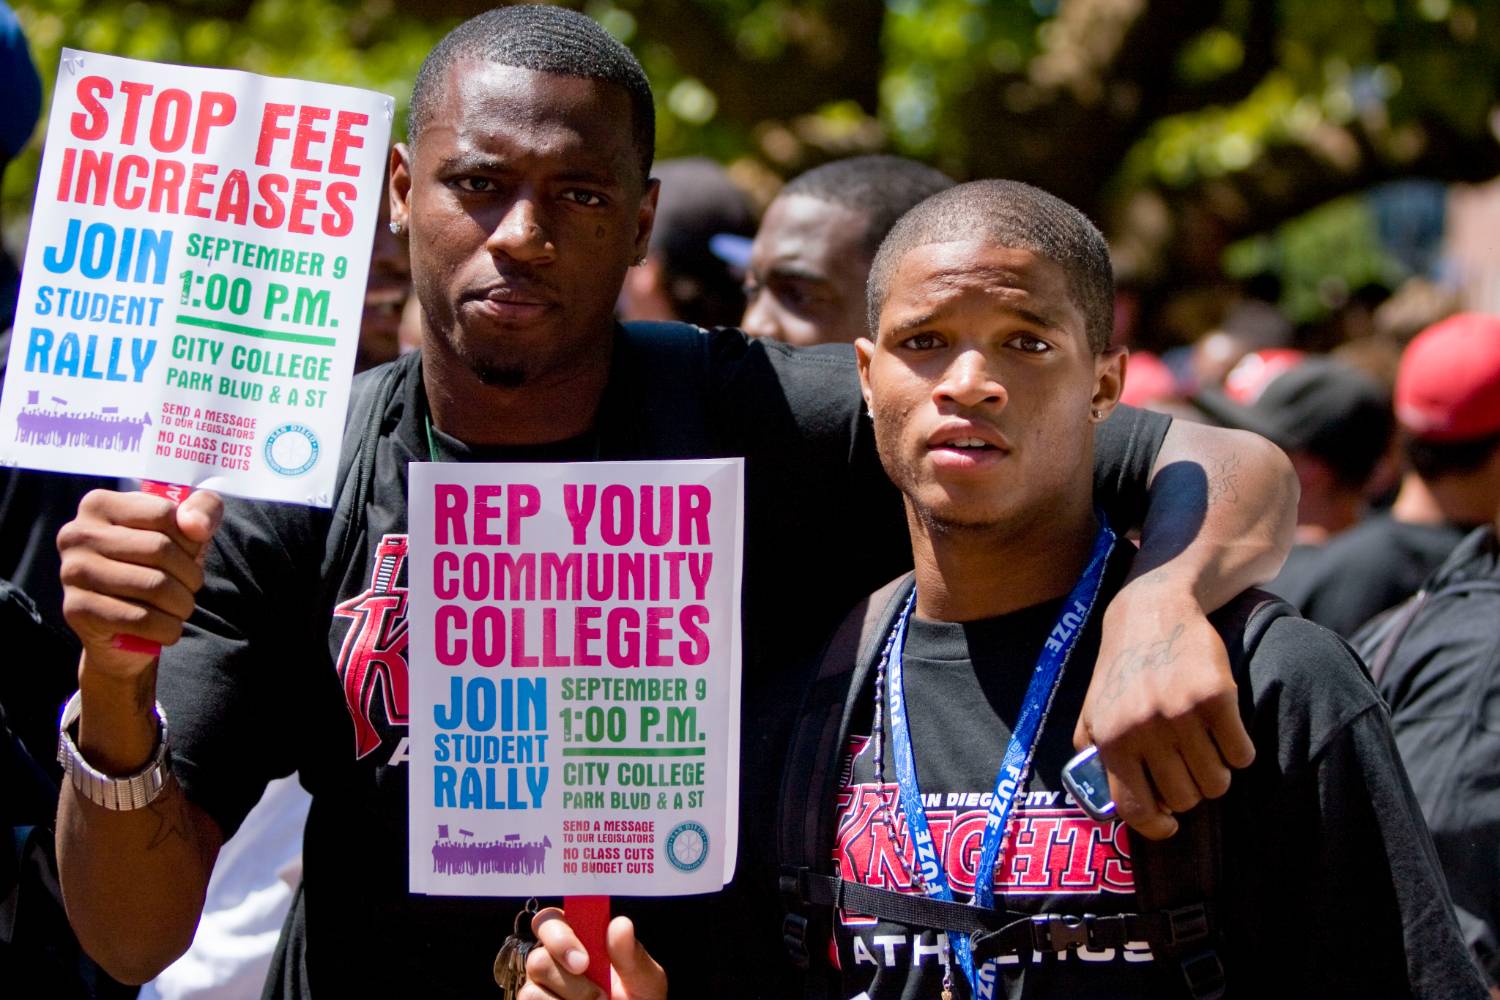 Two students at a rally in 2009 hold up signs protesting fee increases